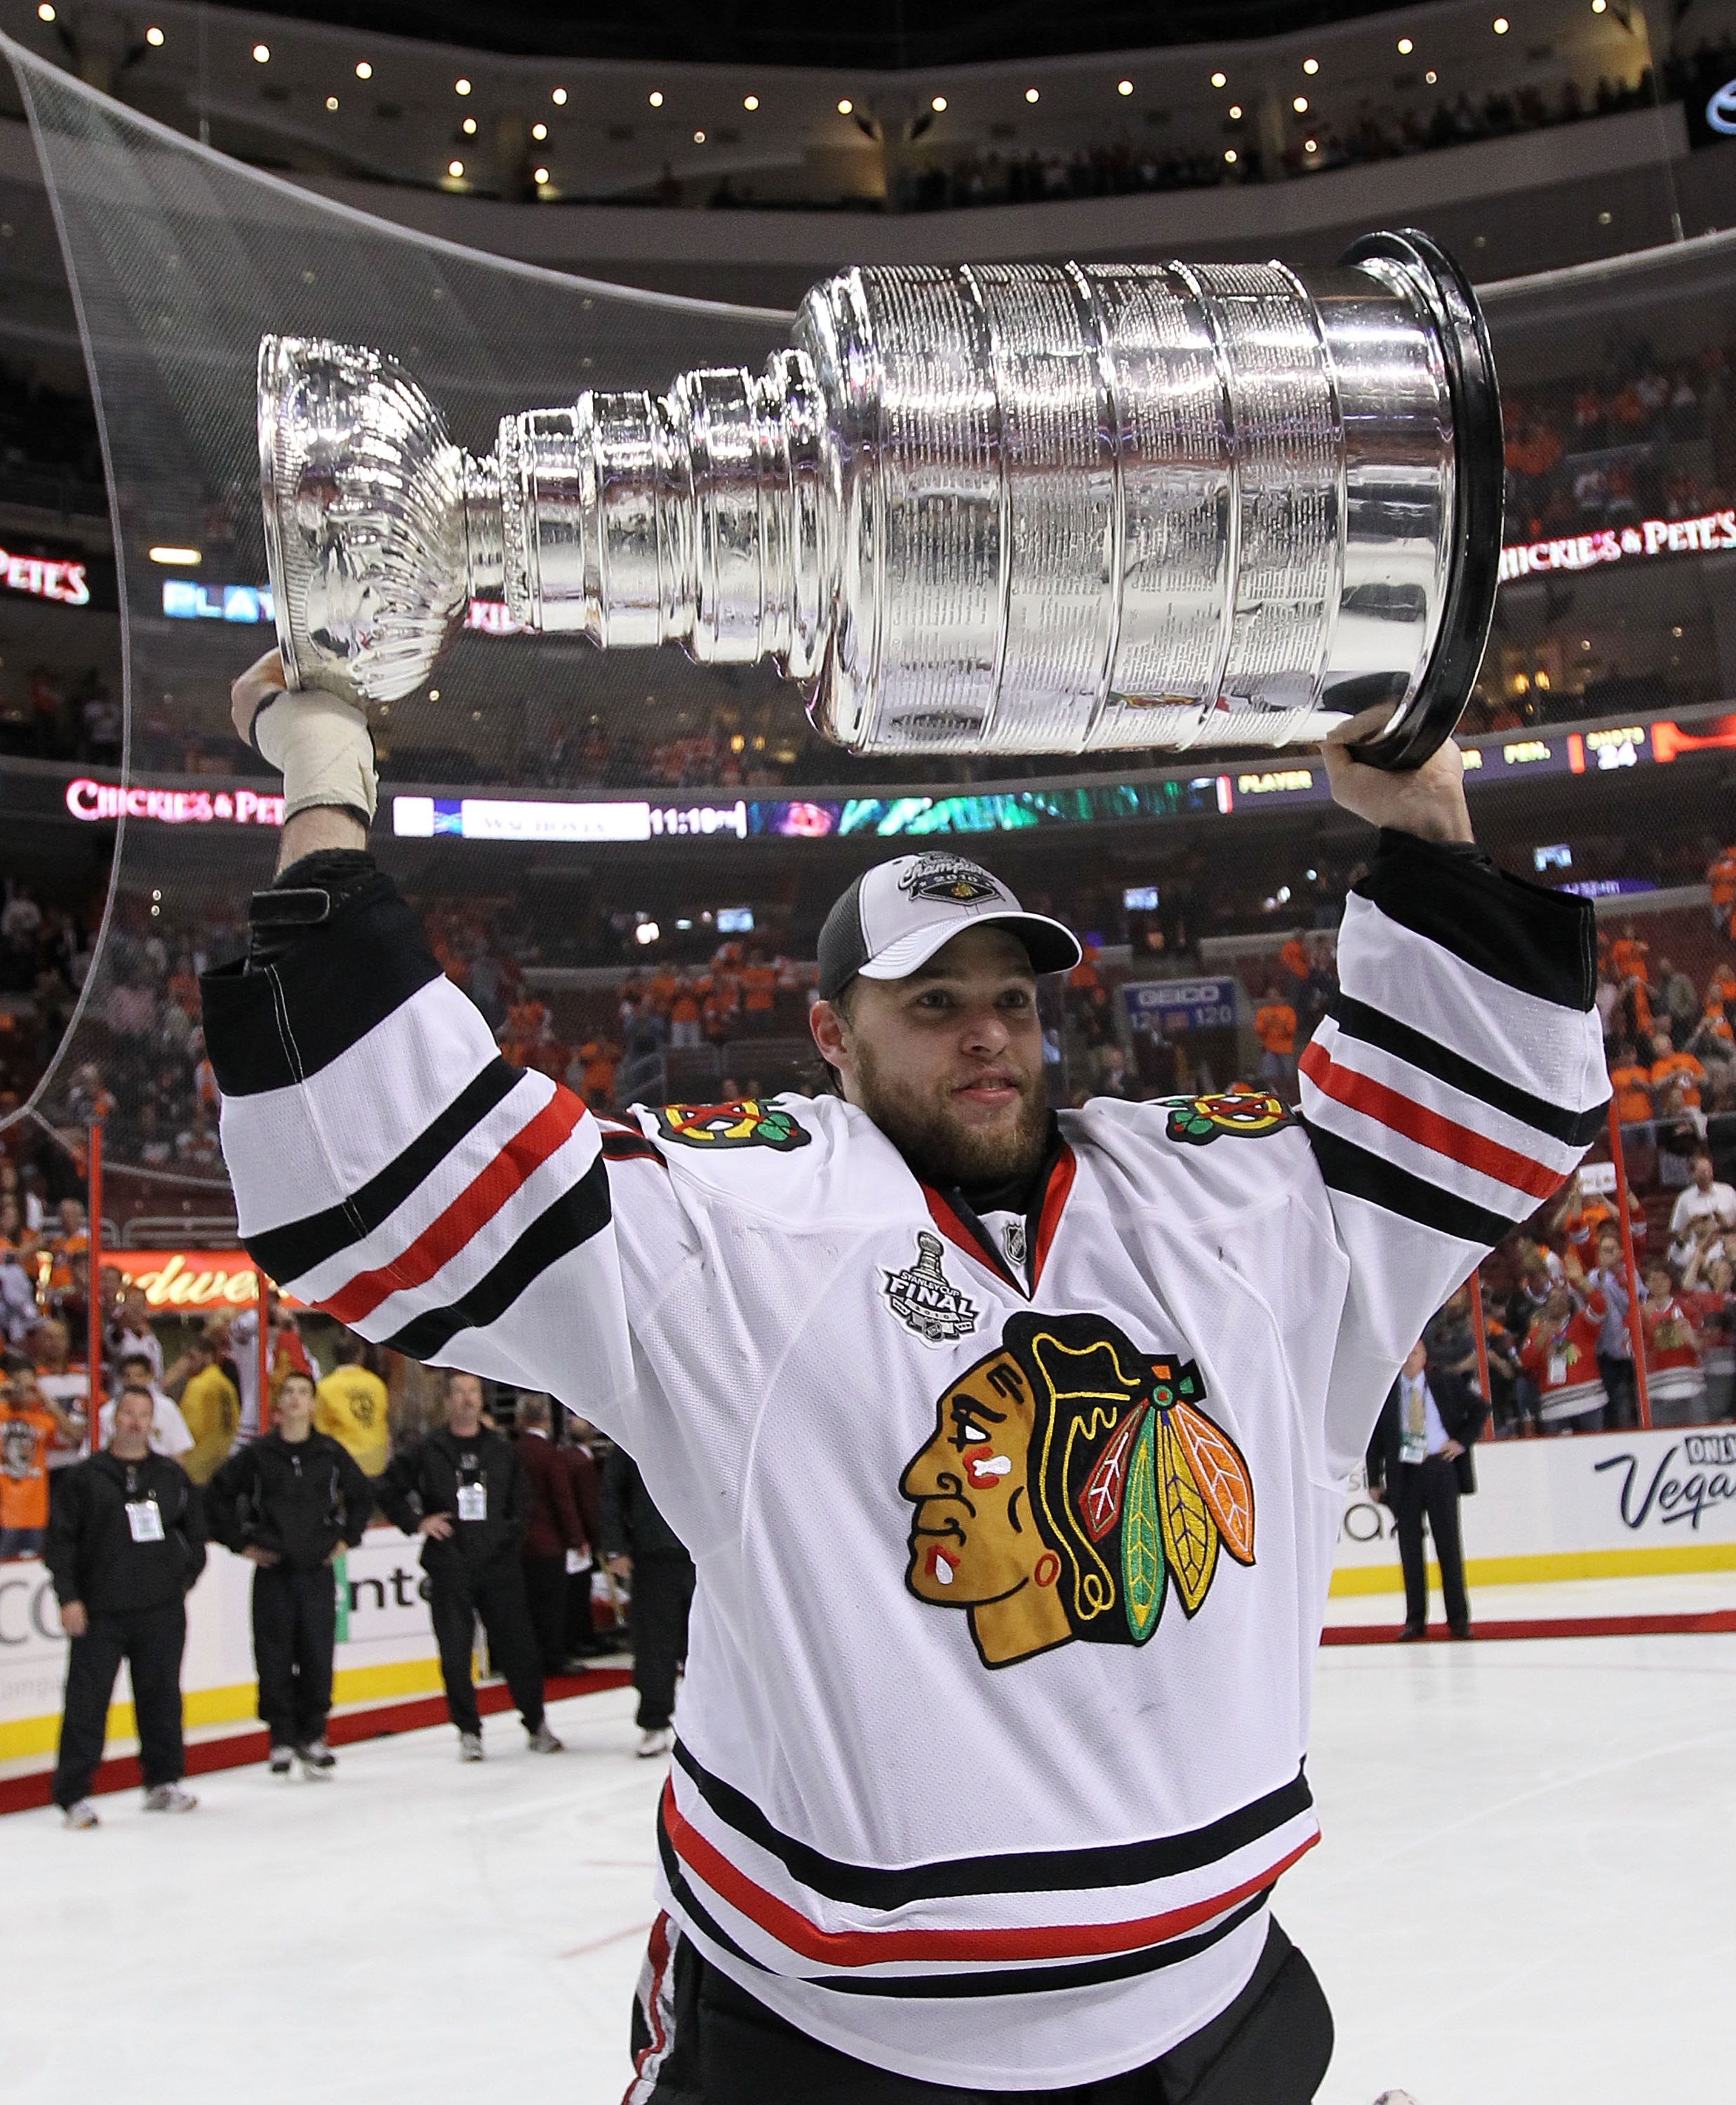 PHILADELPHIA - JUNE 09:  Antti Niemi #31 of the Chicago Blackhawks hoists the Stanley Cup after the Blackhawks defeated the Philadelphia Flyers 4-3 in overtime to win the Stanley Cup in Game Six of the 2010 NHL Stanley Cup Final at the Wachovia Center on 